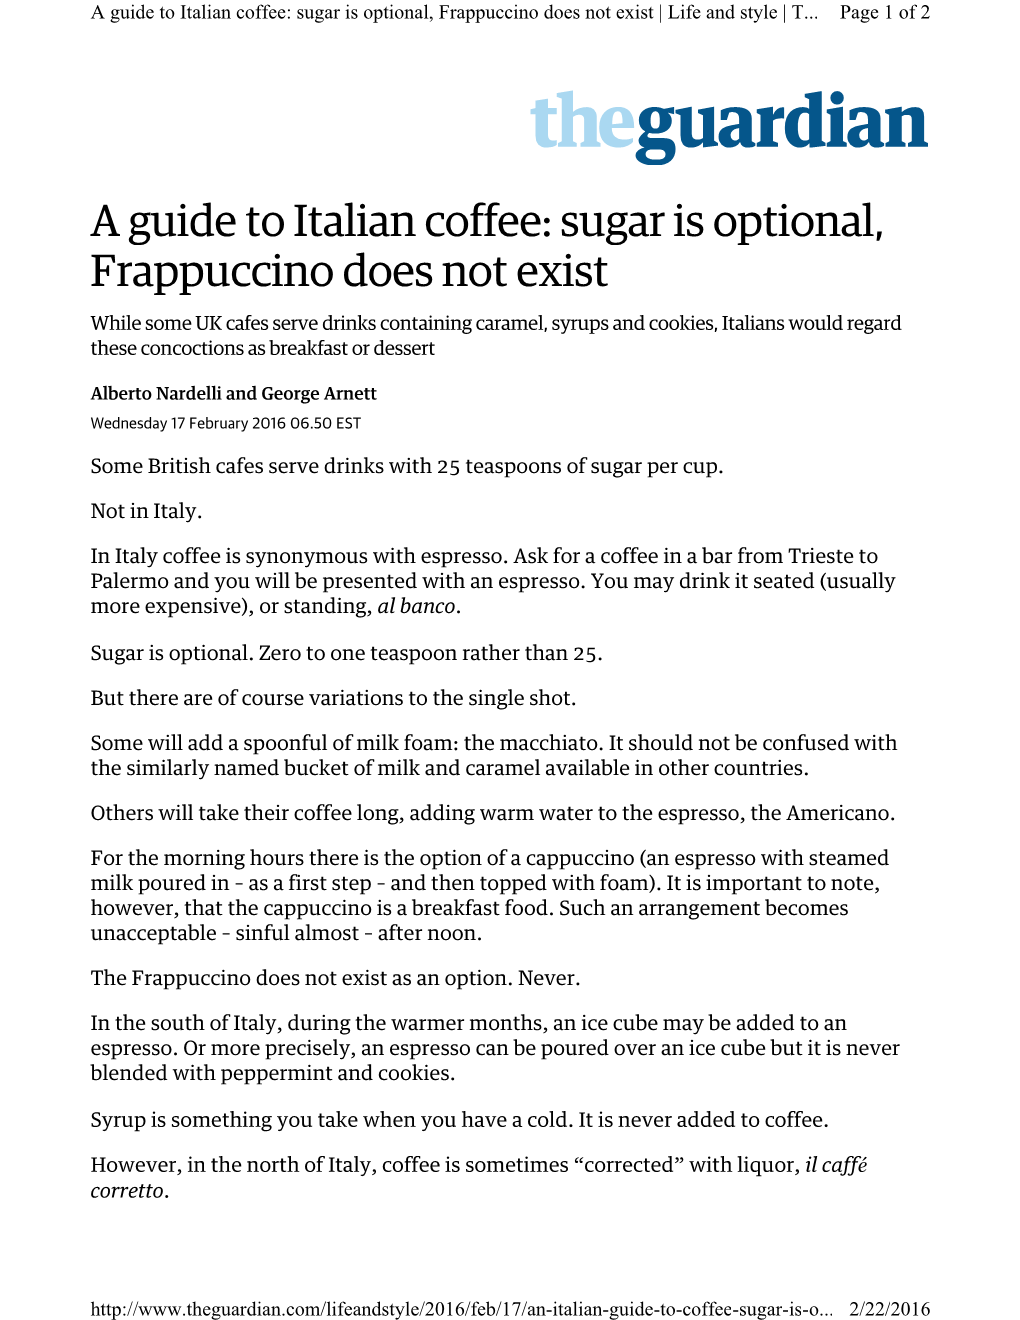 A Guide to Italian Coffee: Sugar Is Optional, Frappuccino Does Not Exist | Life and Style | T